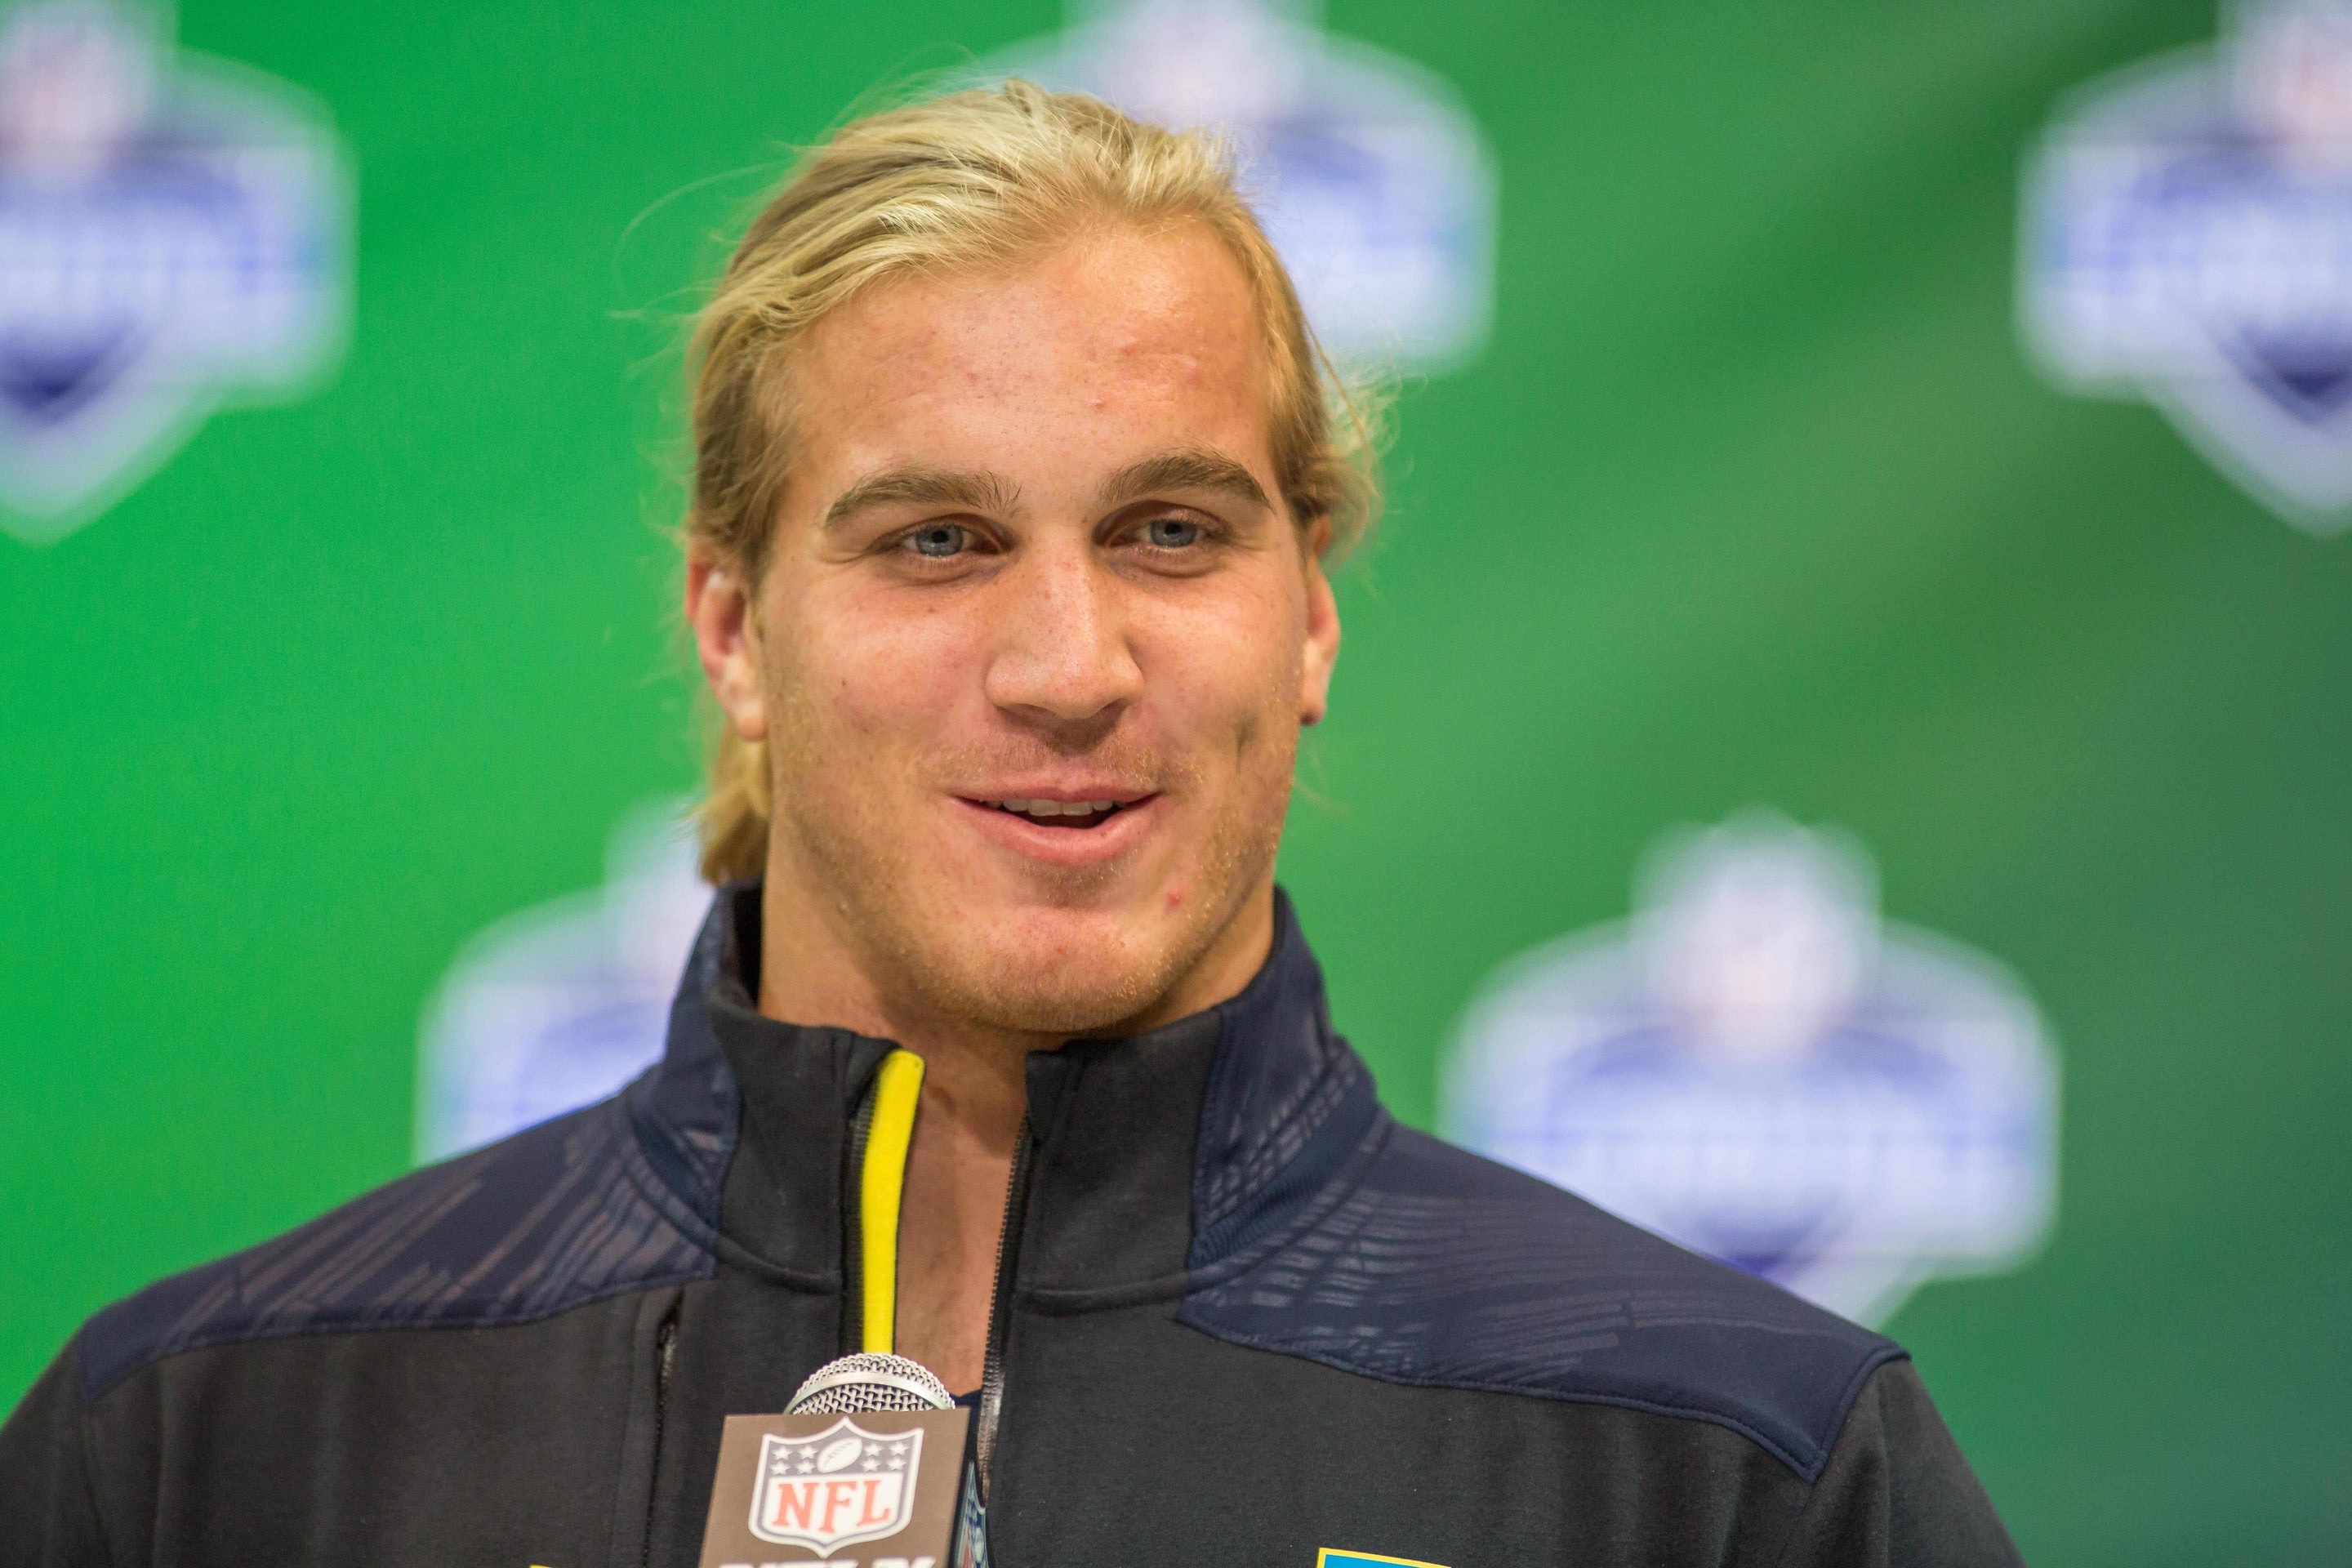 Mar 4, 2017; Indianapolis, IN, USA; Florida linebacker Alex Anzalone speaks to the media during the 2017 combine at Indiana Convention Center. Mandatory Credit: Trevor Ruszkowski-USA TODAY Sports